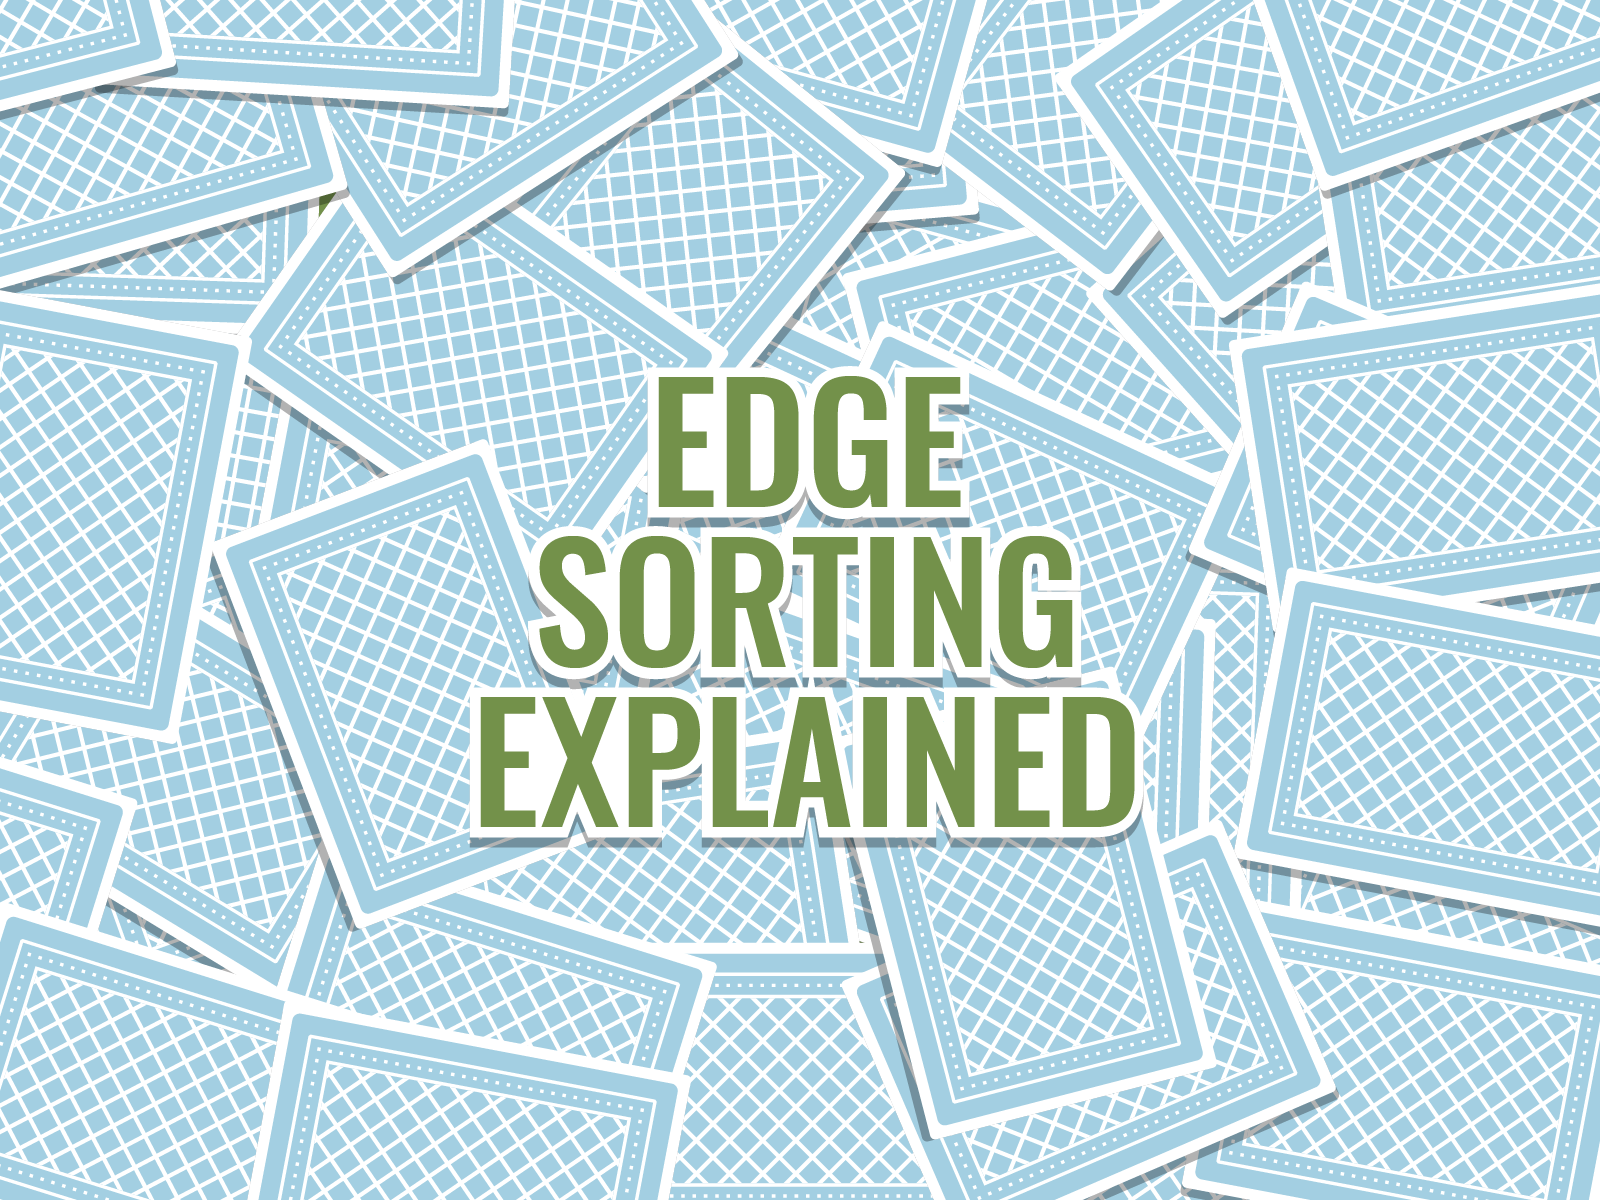 Edge Sorting: Pure Cheating, Or A Smart Technique To Help You Beat The House?